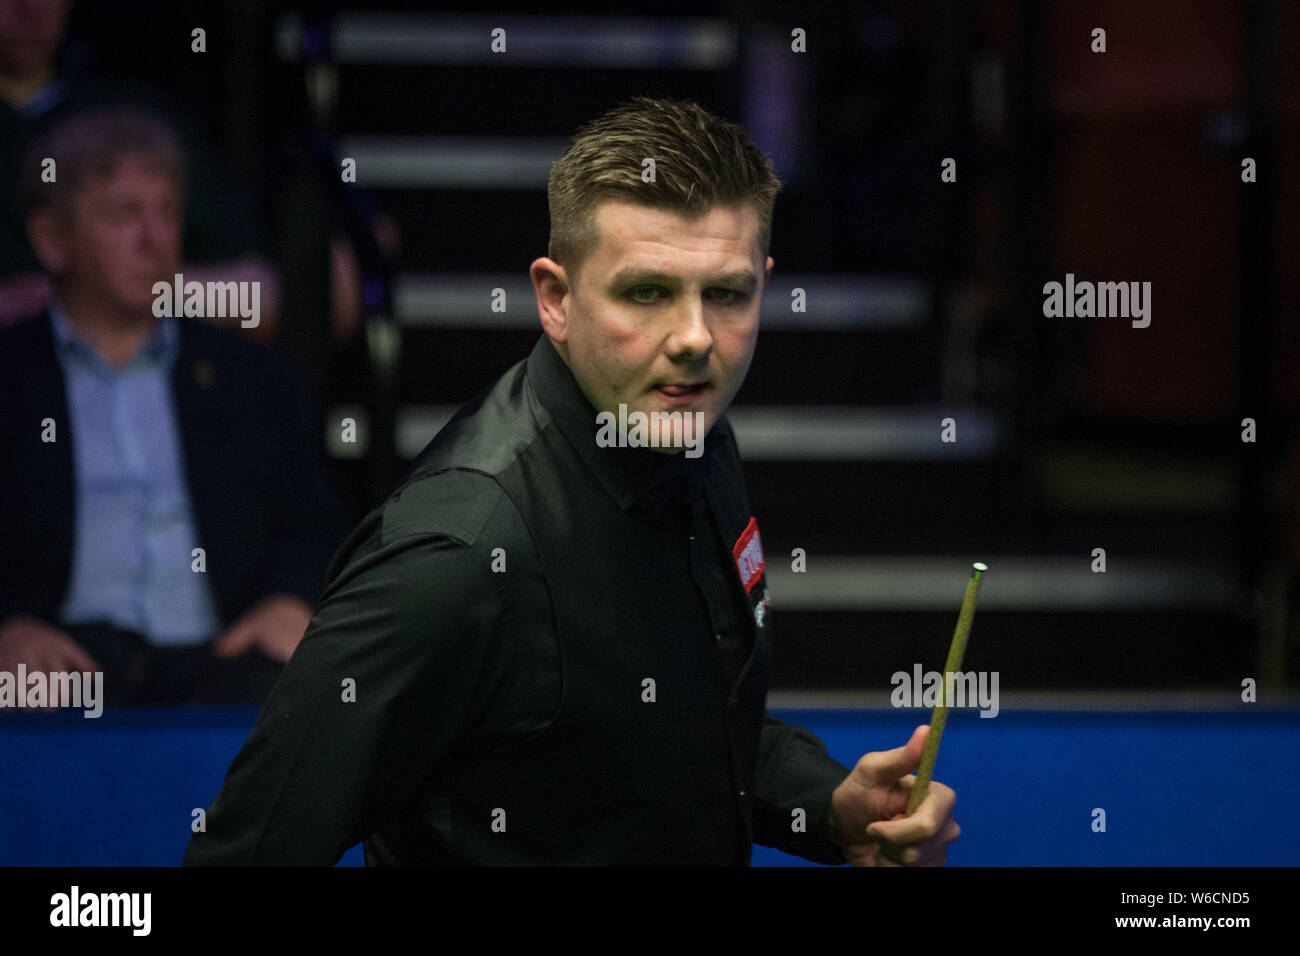 Ryan Day of Wales considers a shot to Anthony McGill of Scotland in their first round match during the 2018 Betfred World Snooker Championship at the Stock Photo